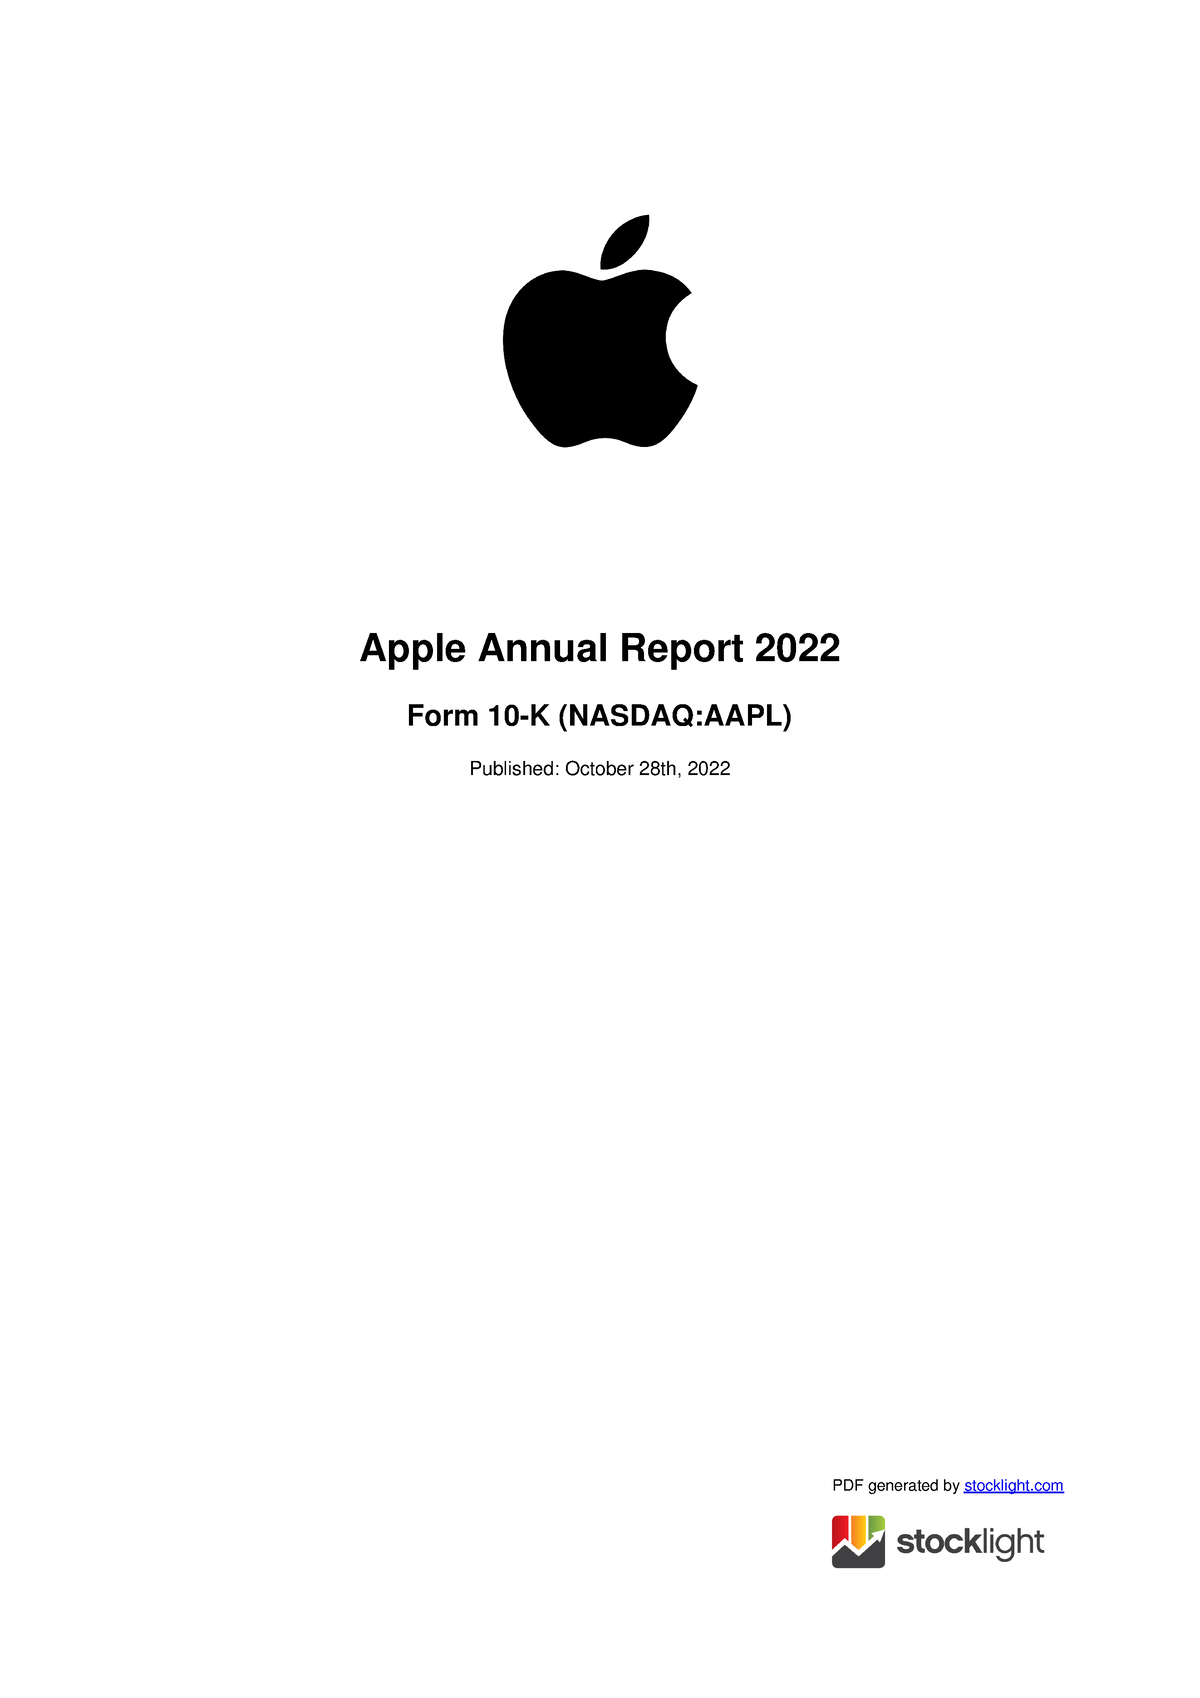 Apple Annual Report 20549 FORM 10K (Mark One) ☒ ANNUAL REPORT